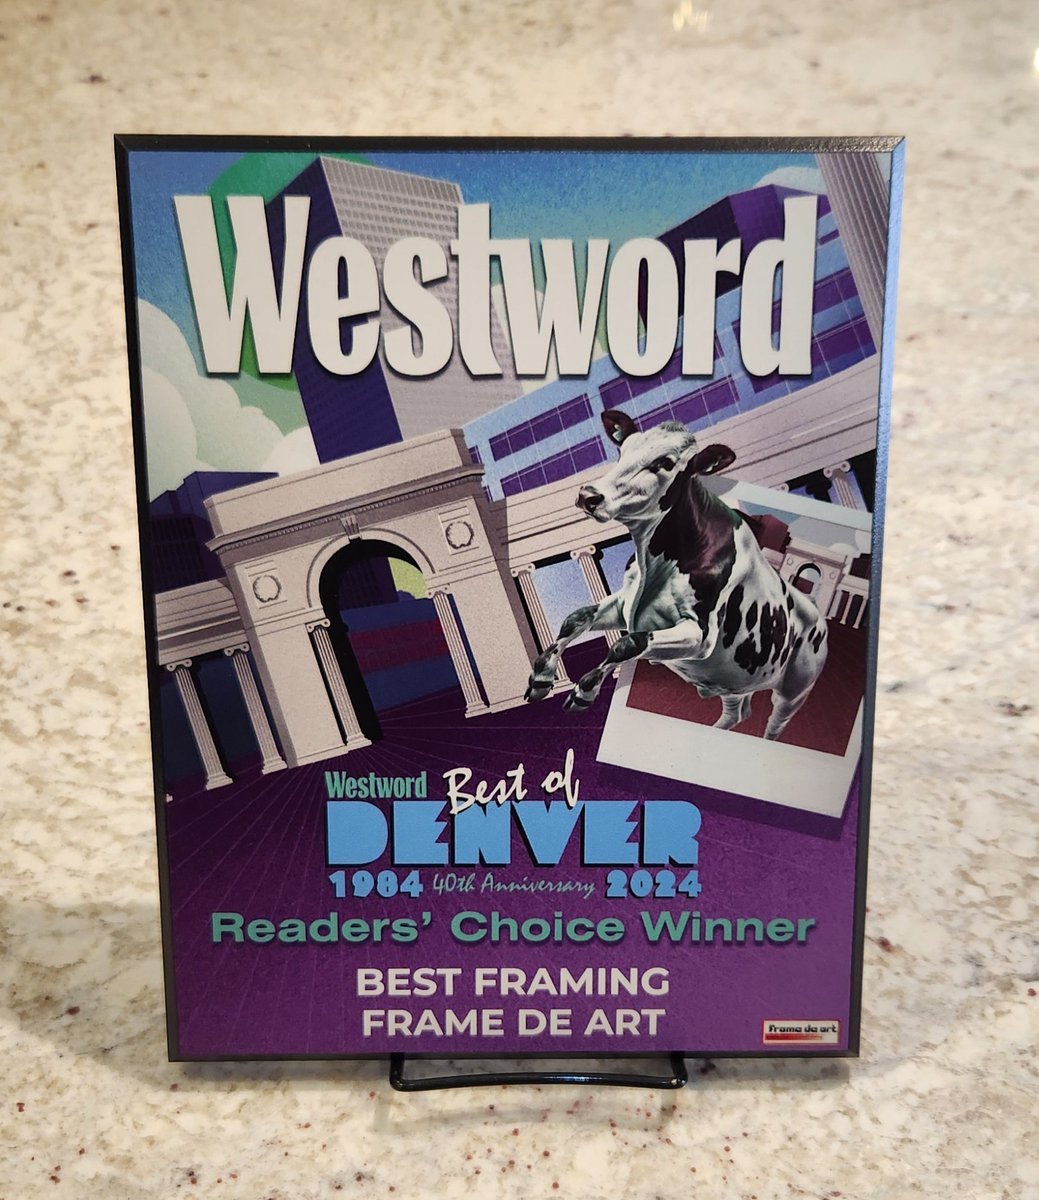 Proud to have our 2024 Westword’s Best of Denver Reader’s Choice Winner, “Best Framing” Plaq now on display at our store!  Every Reader’s Choice and Editor’s Choice plaq in the City will have our Frame de Art Logo on the bottom right!  

#ReadersChoice #BestFraming #Westword